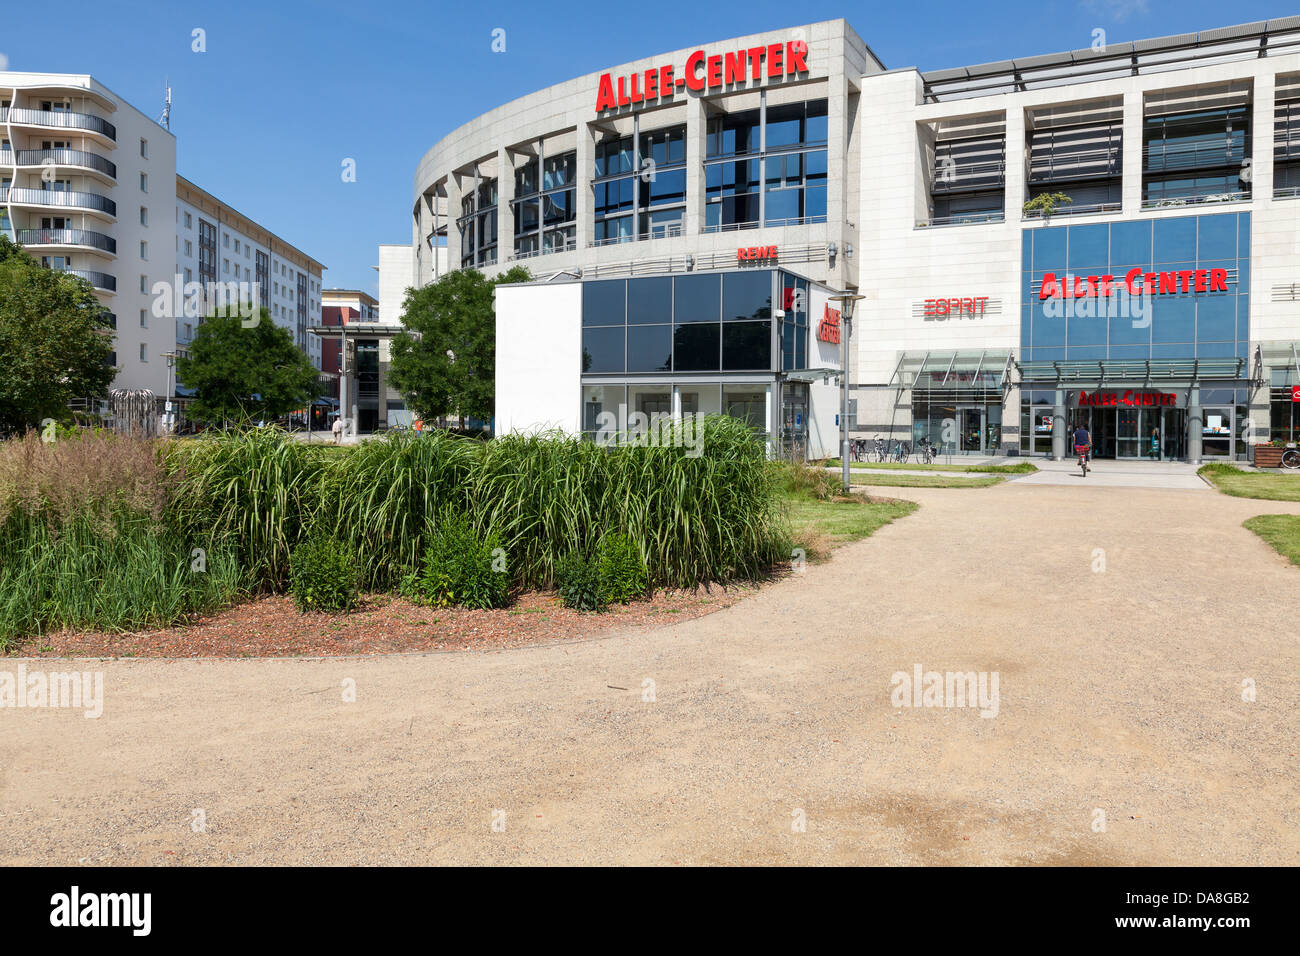 Allee Shopping Center, Magdeburg, Saxony-Anhalt, Germany Stock Photo